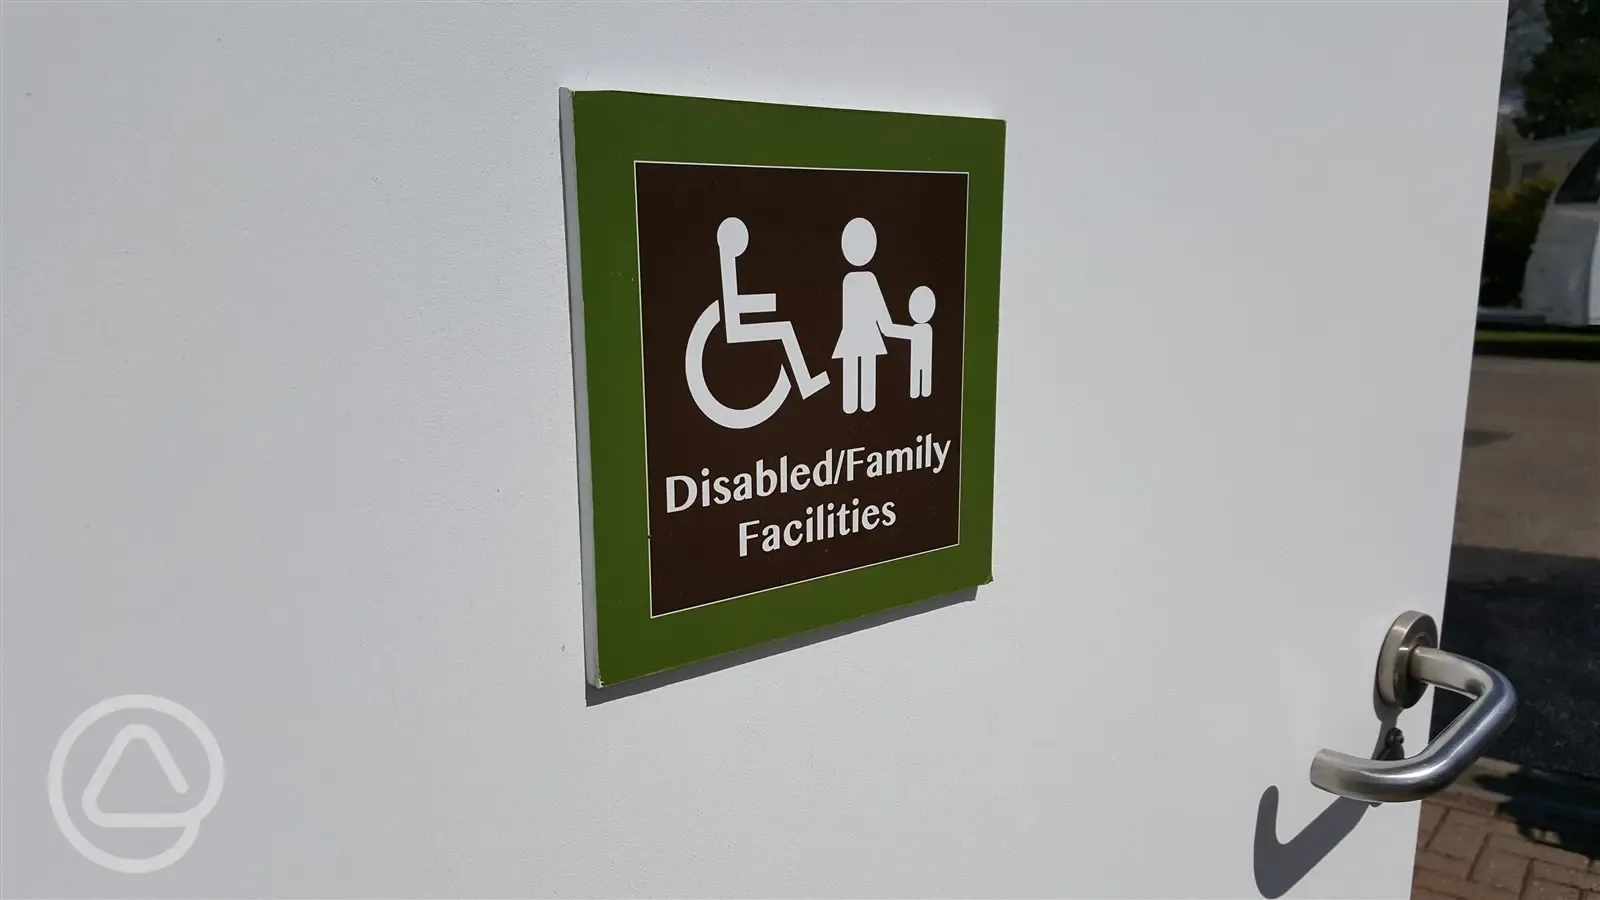 Newly refurbished disabled and family facilities